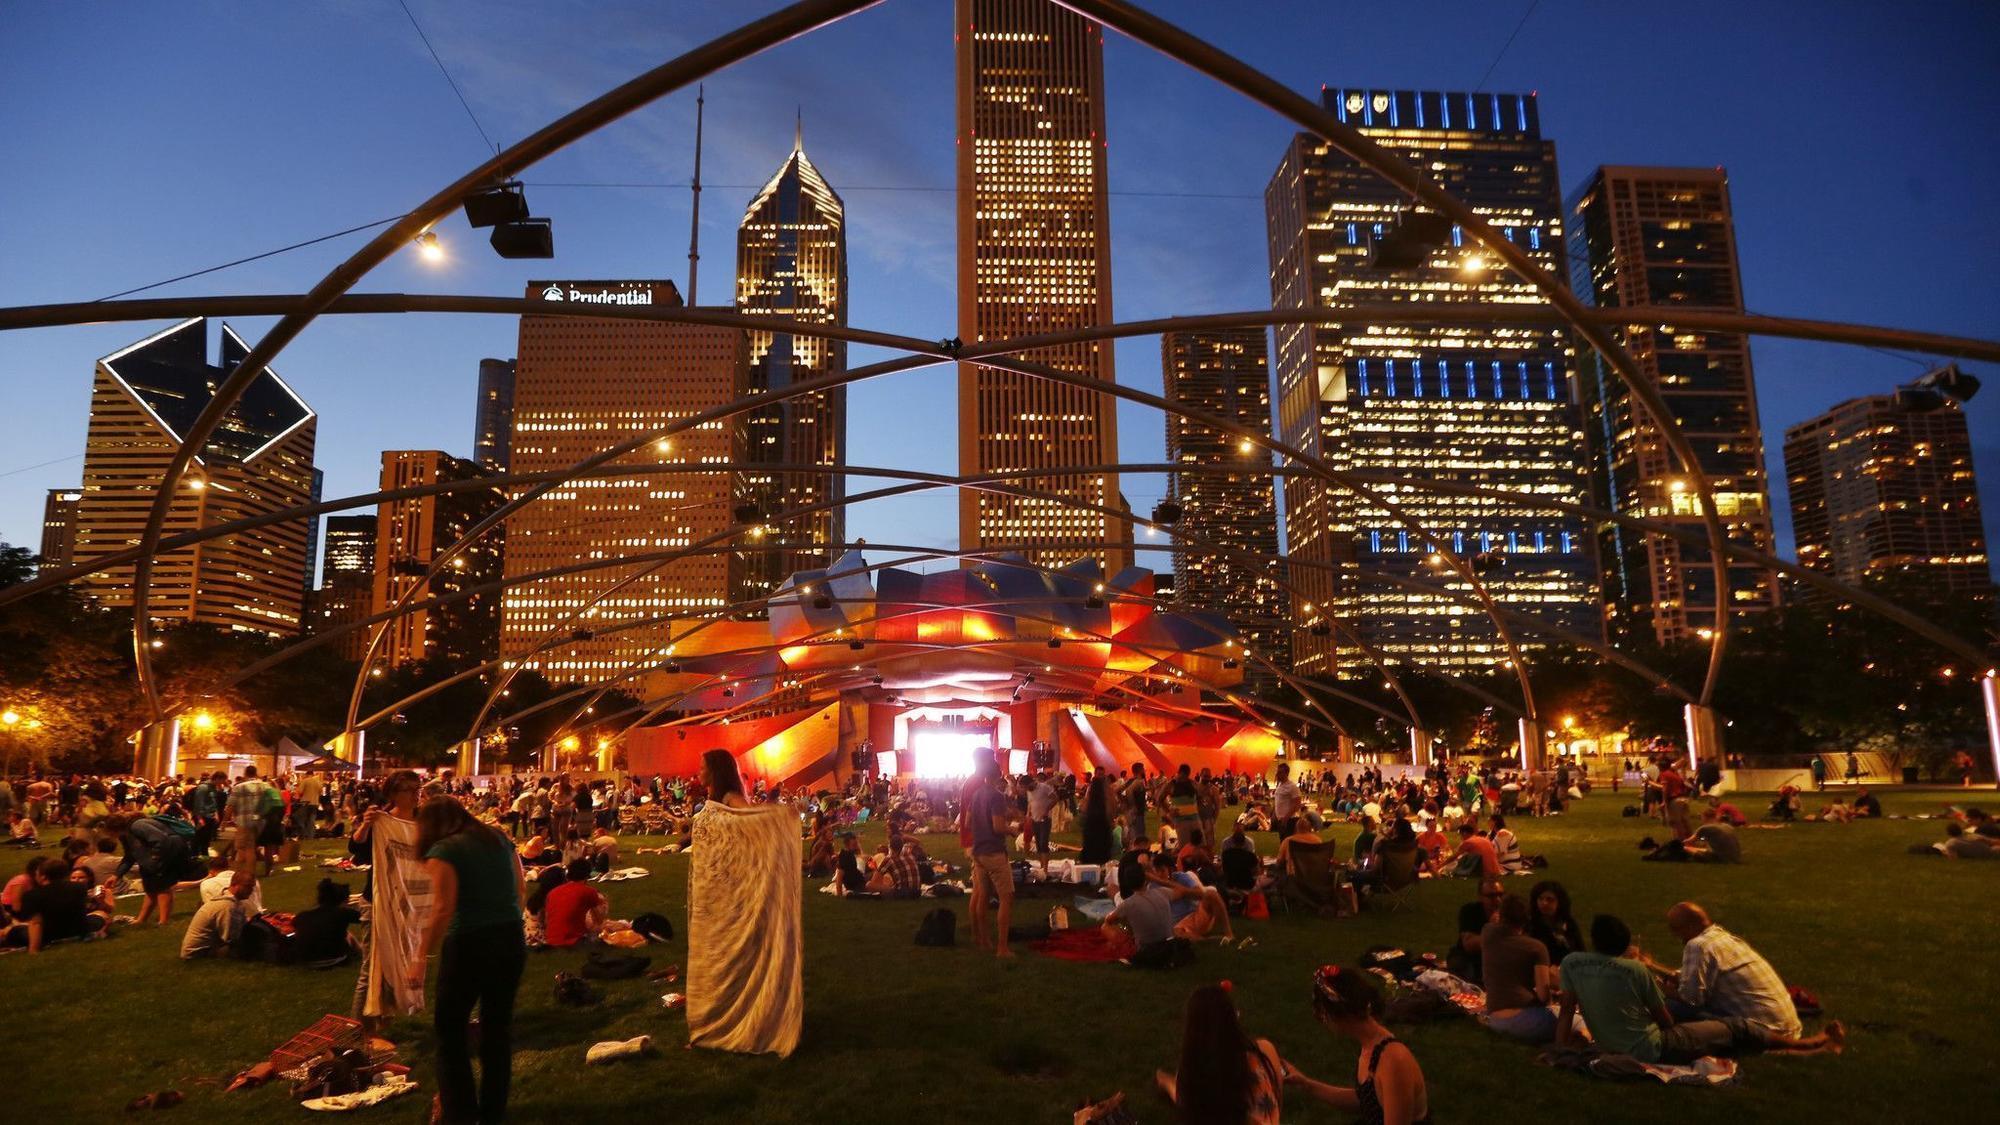 Heres A First Look At Millennium Parks 2019 Summer Season Concerts